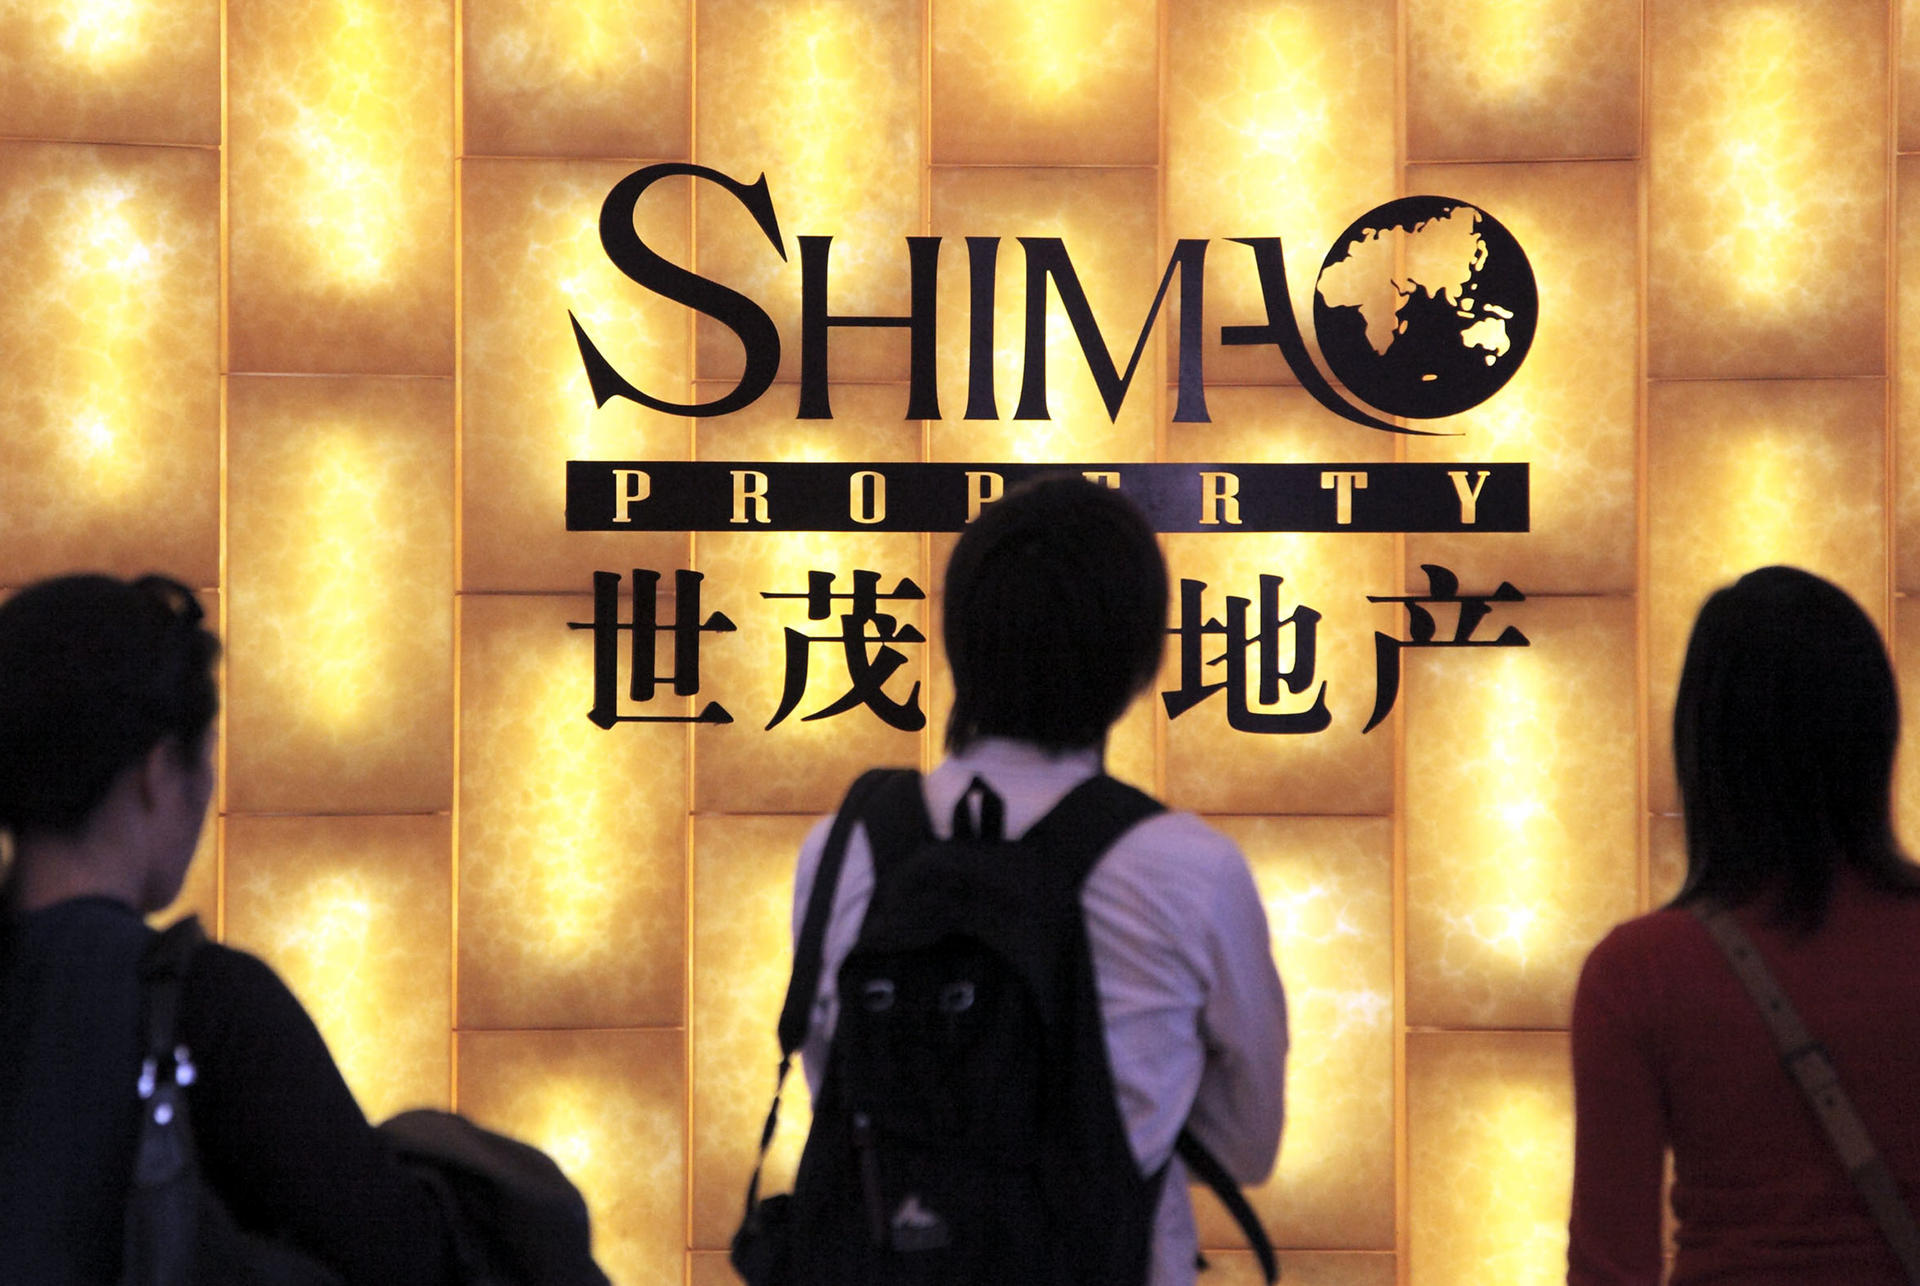 Shimao reported a 20.5 per cent jump in net profit for the first half of the year. Photo: Bloomberg